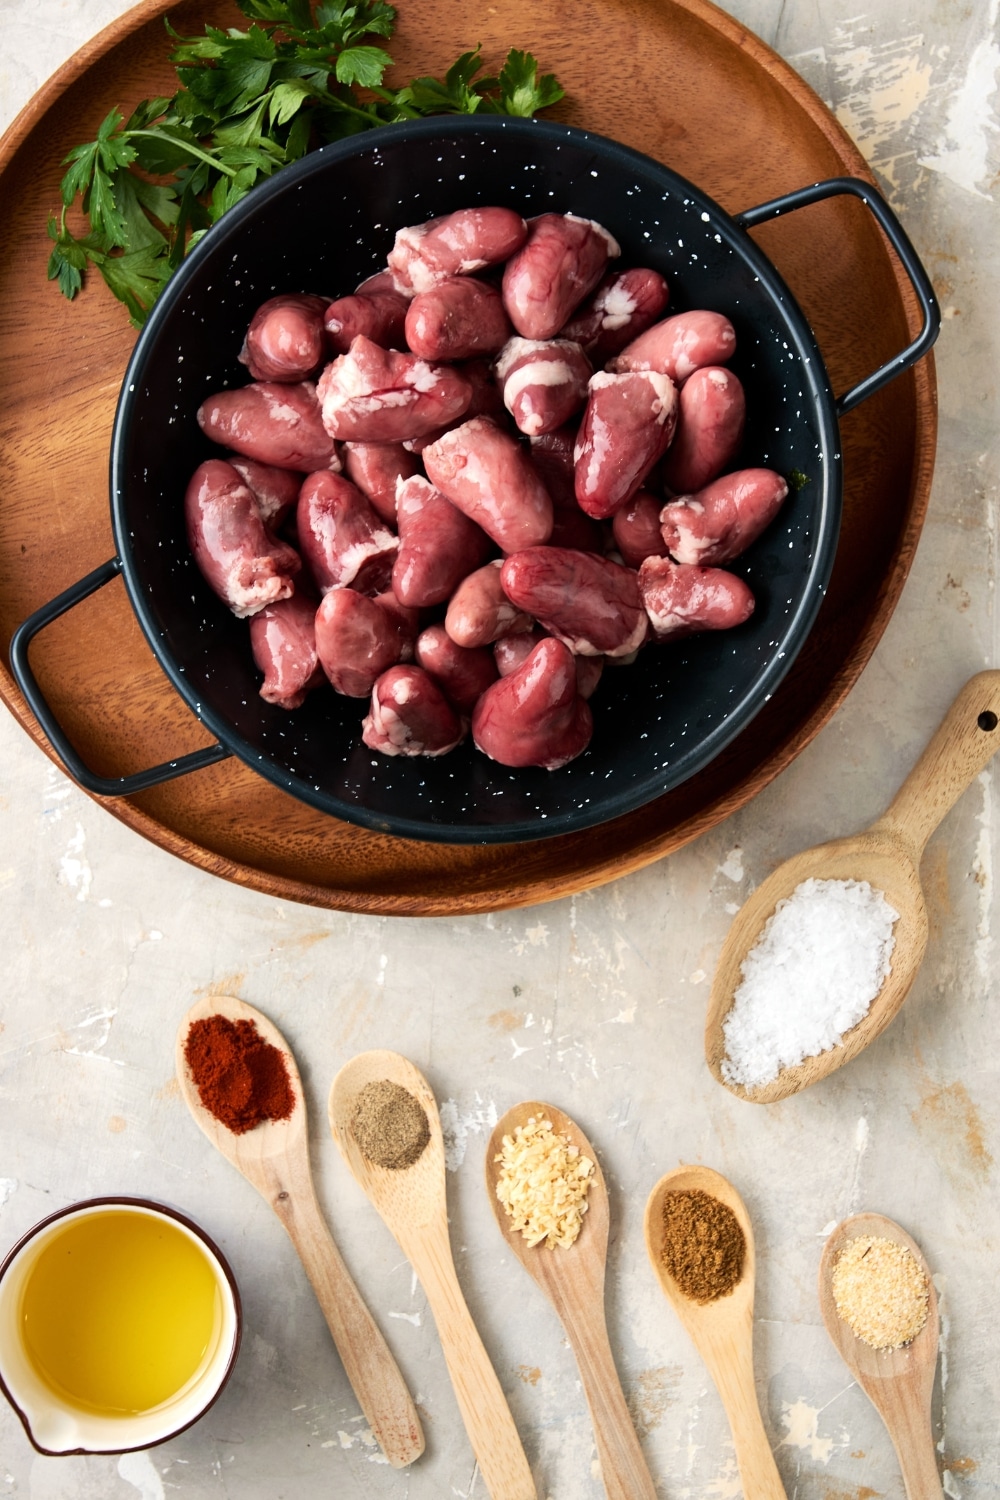 An overhead shot of chicken hearts ingredients. There are raw chicken hearts in a ceramic bowl on a wooden server, and several wooden spoons holding spices such as salt, smoked paprika, cumin, garlic powder, and onion powder.